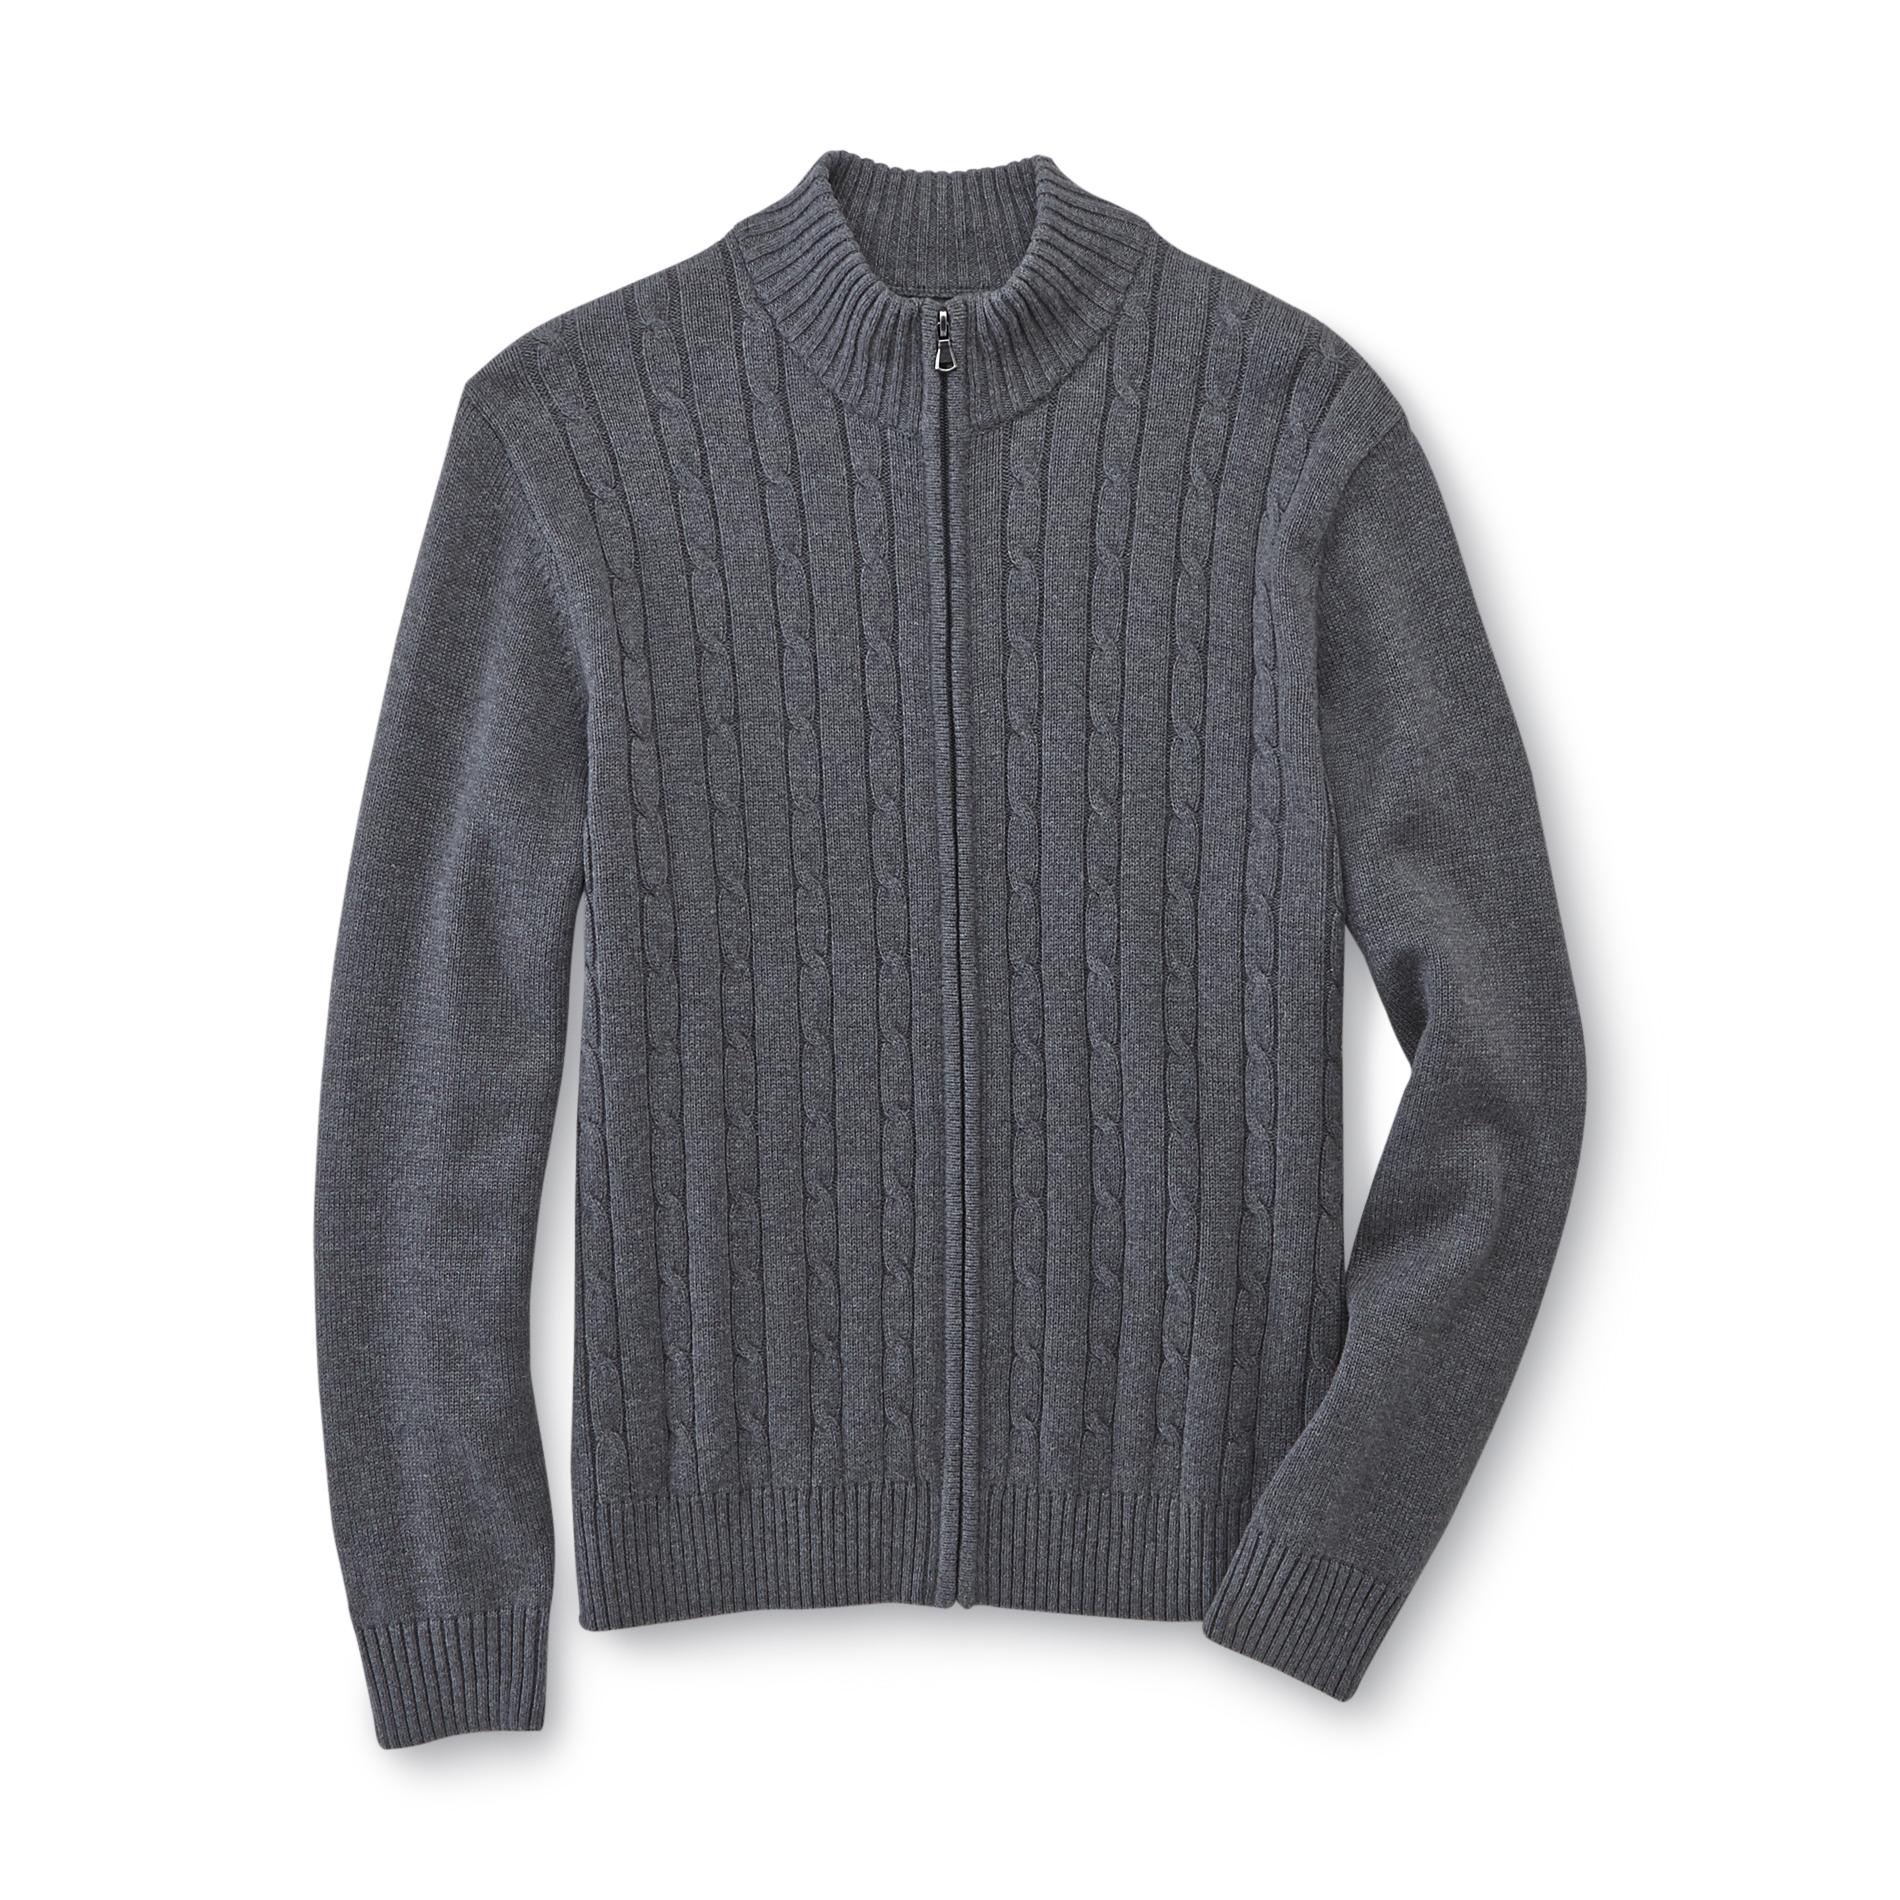 David Taylor Collection Men's Zip-Up Cable Knit Sweater